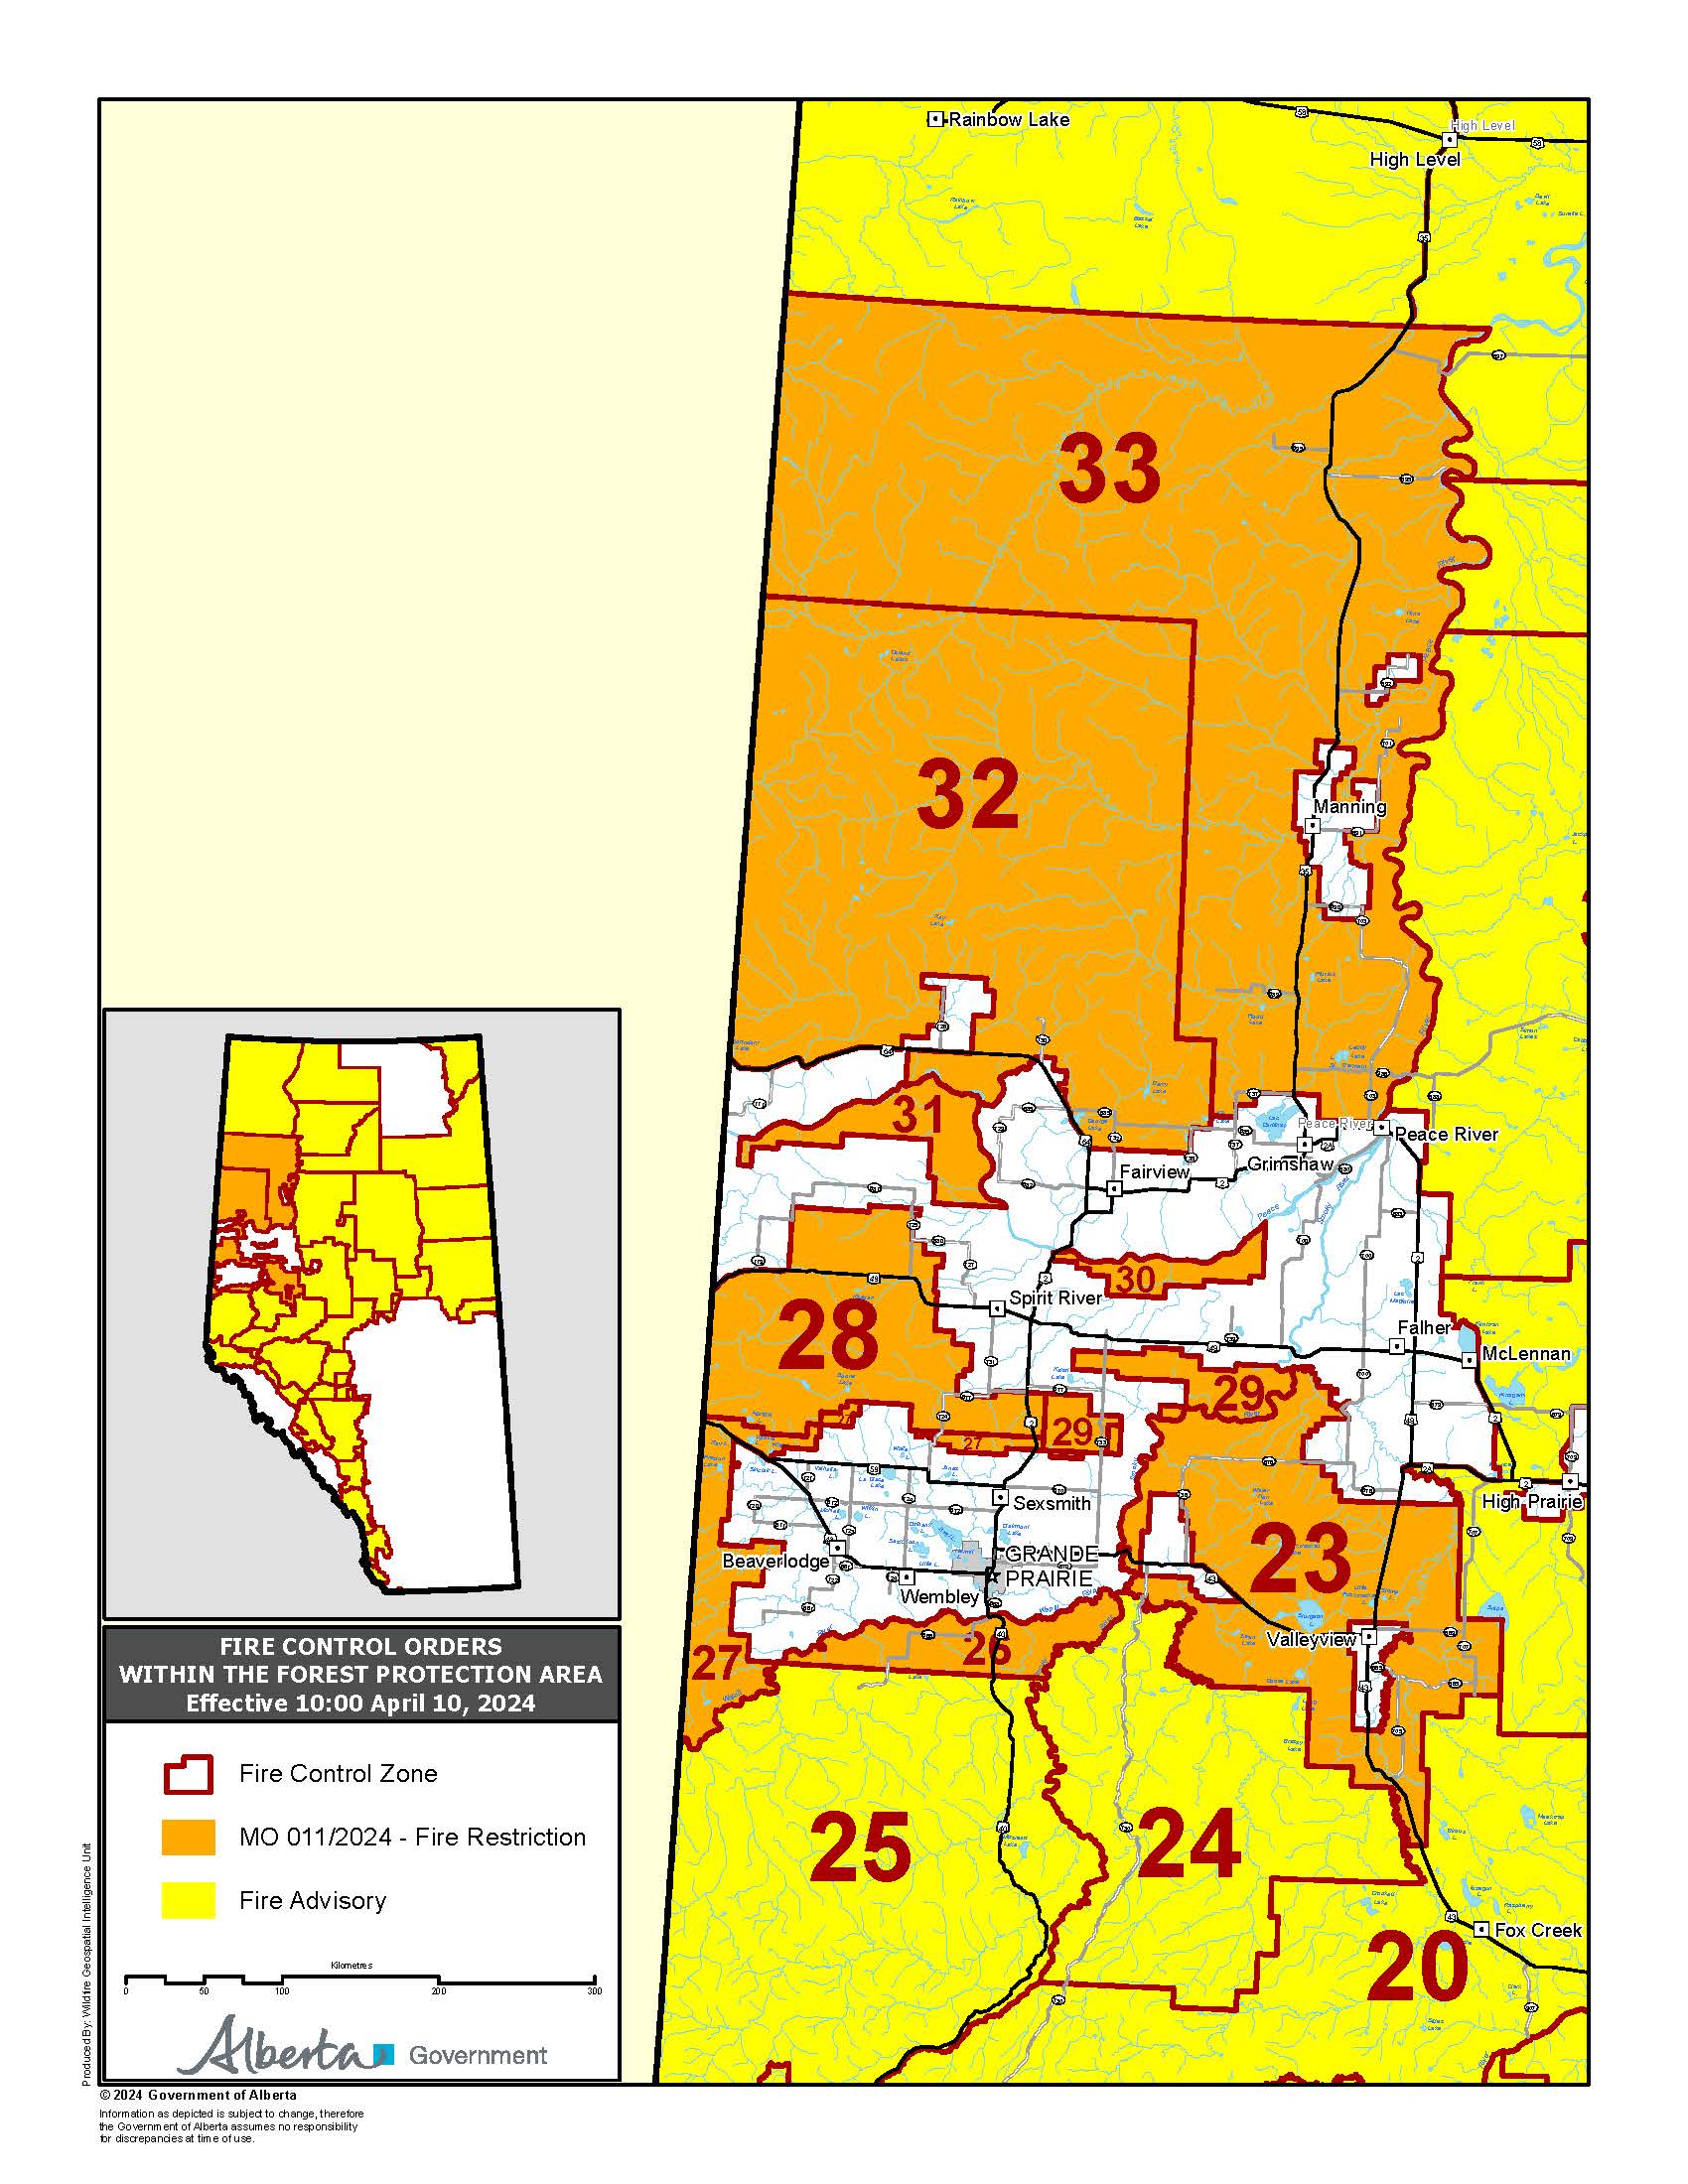 Fire Restriction MO011_2024 and fire advisories zoomed 8x11 April10